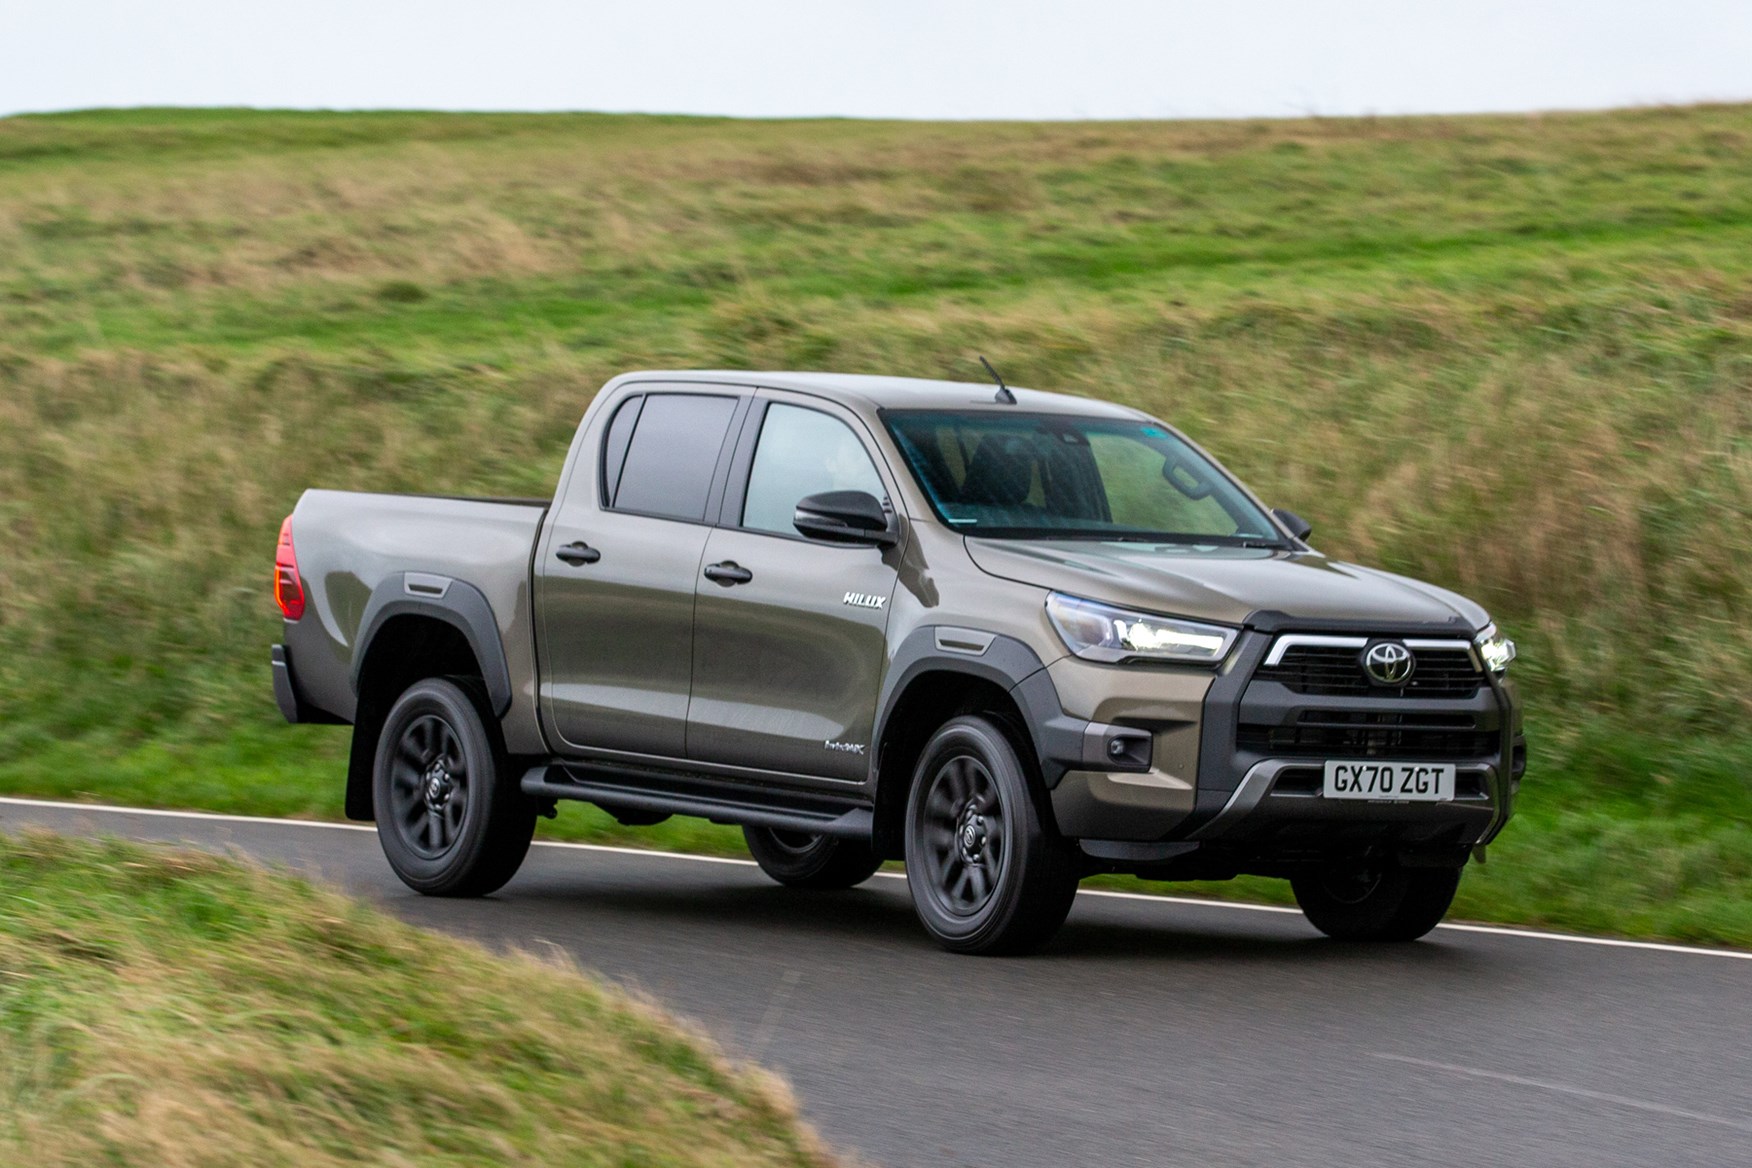 Toyota Hilux review, 2020 facelift, front view, rolling round corner, Invincible X, bronze